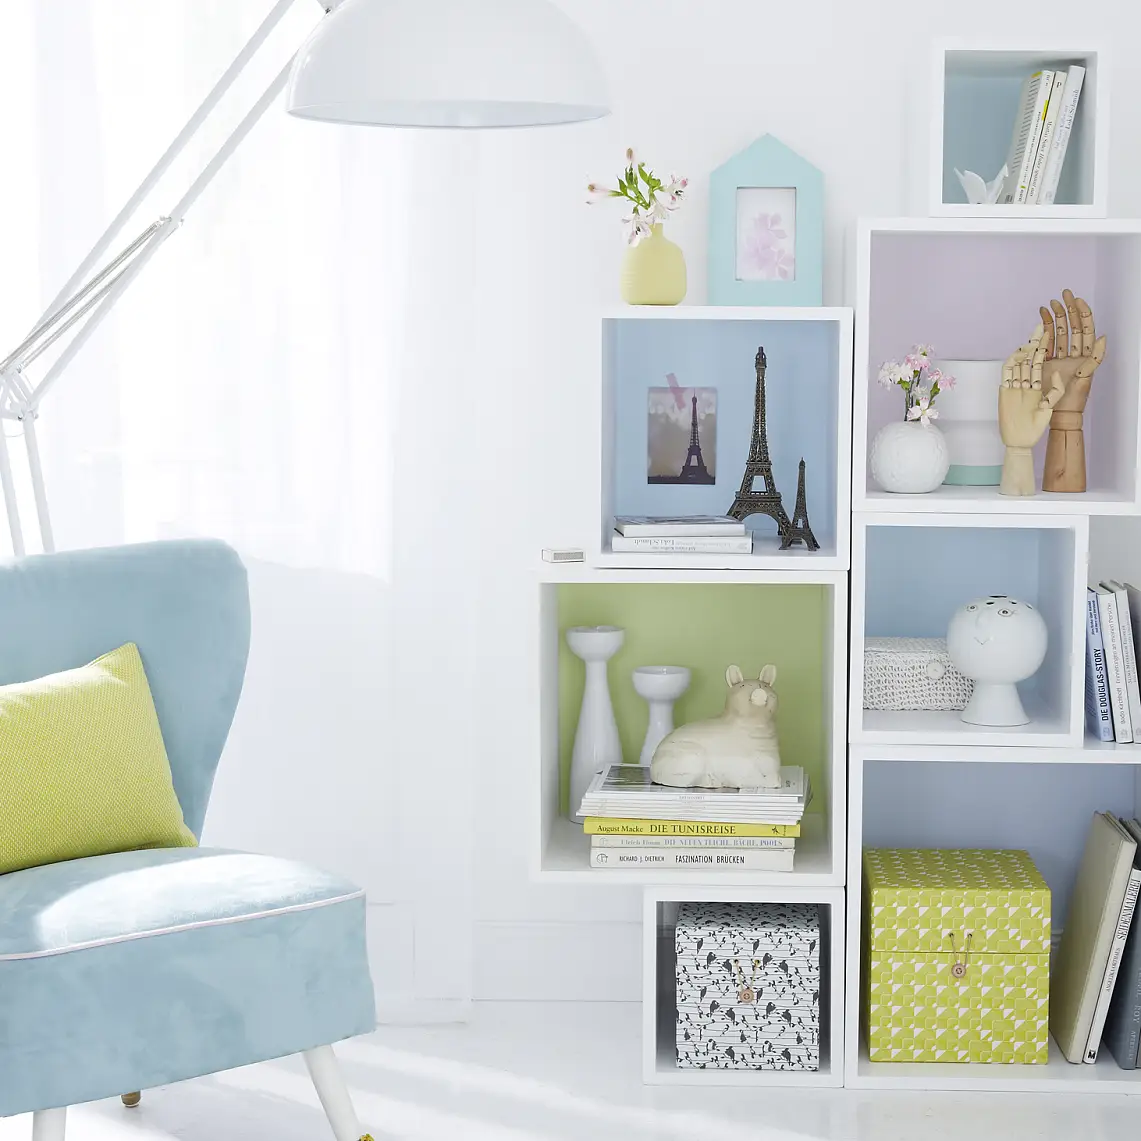 Beautify your shelves with color